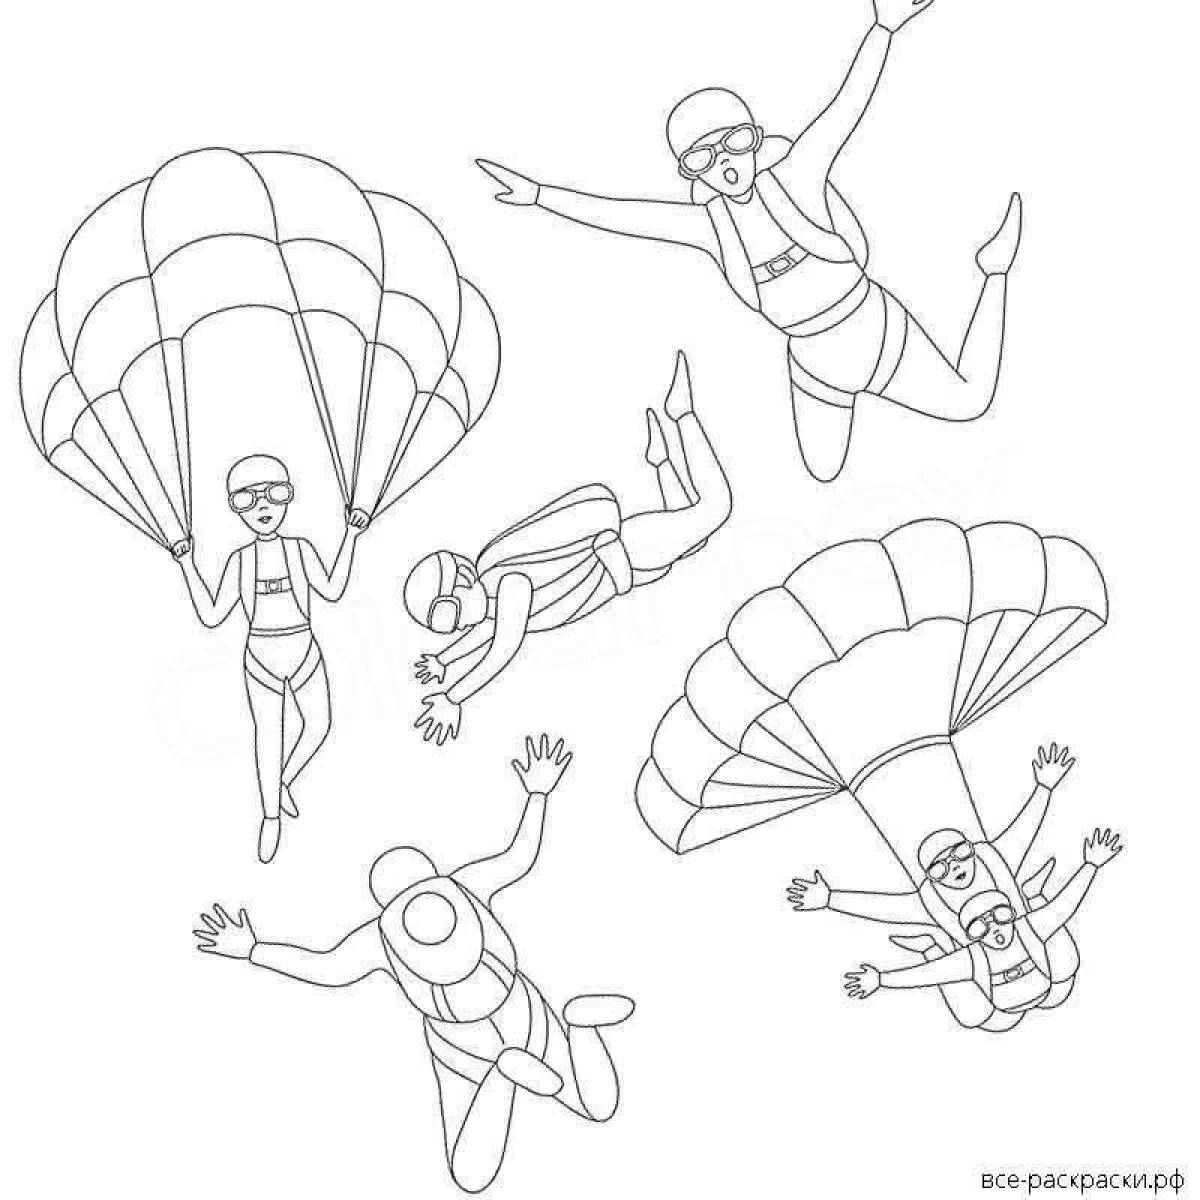 Fearless skydiver coloring page